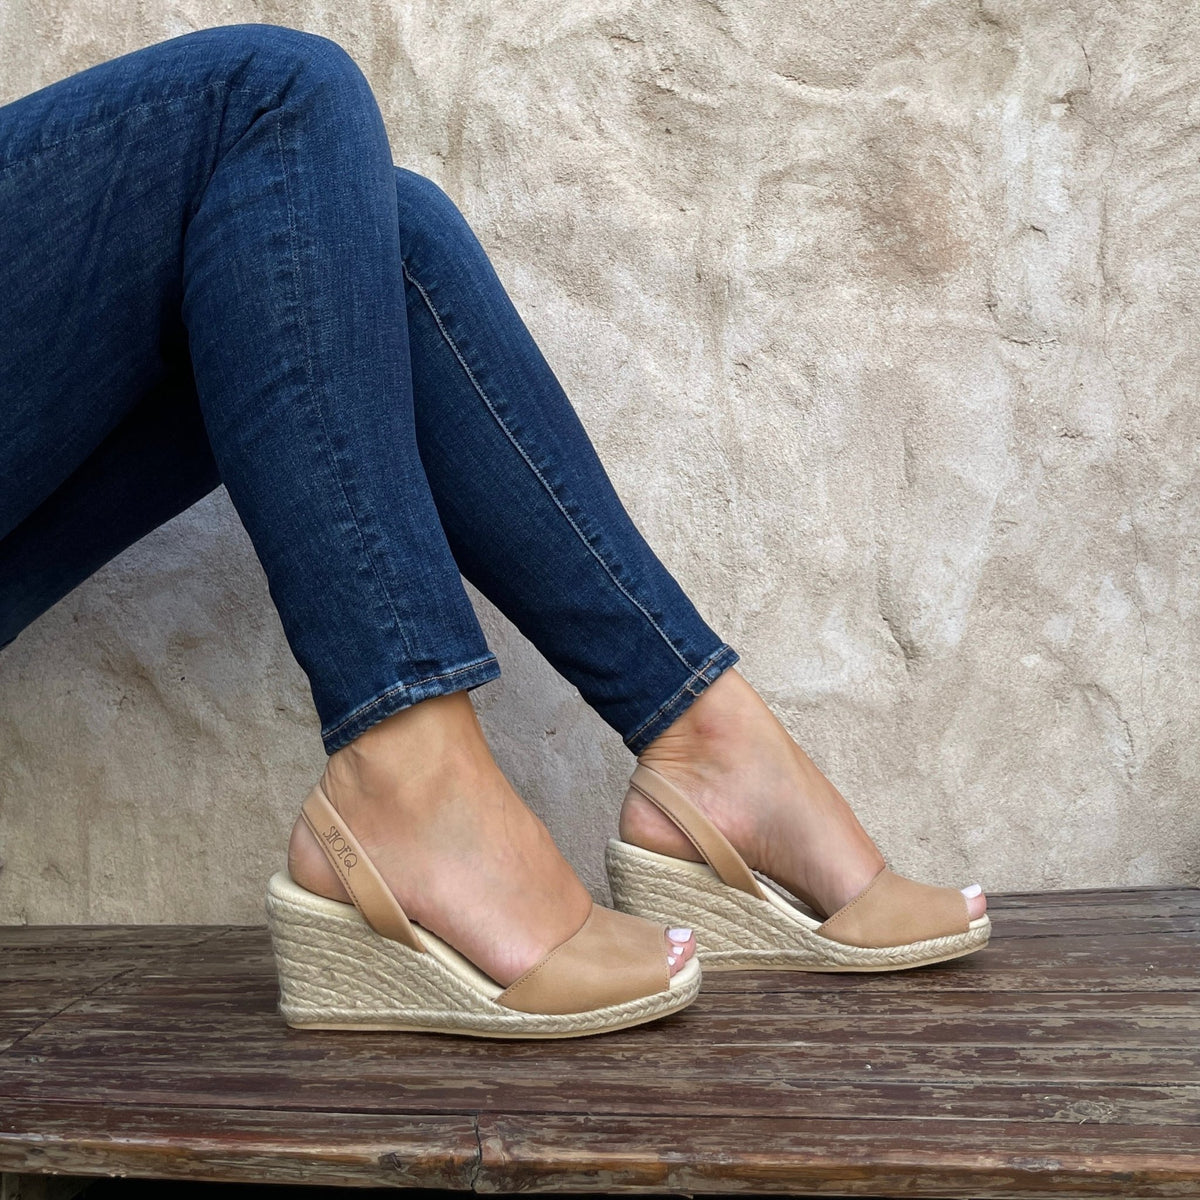 Classic Espadrille Wedge in Caramel Leather - Shoeq